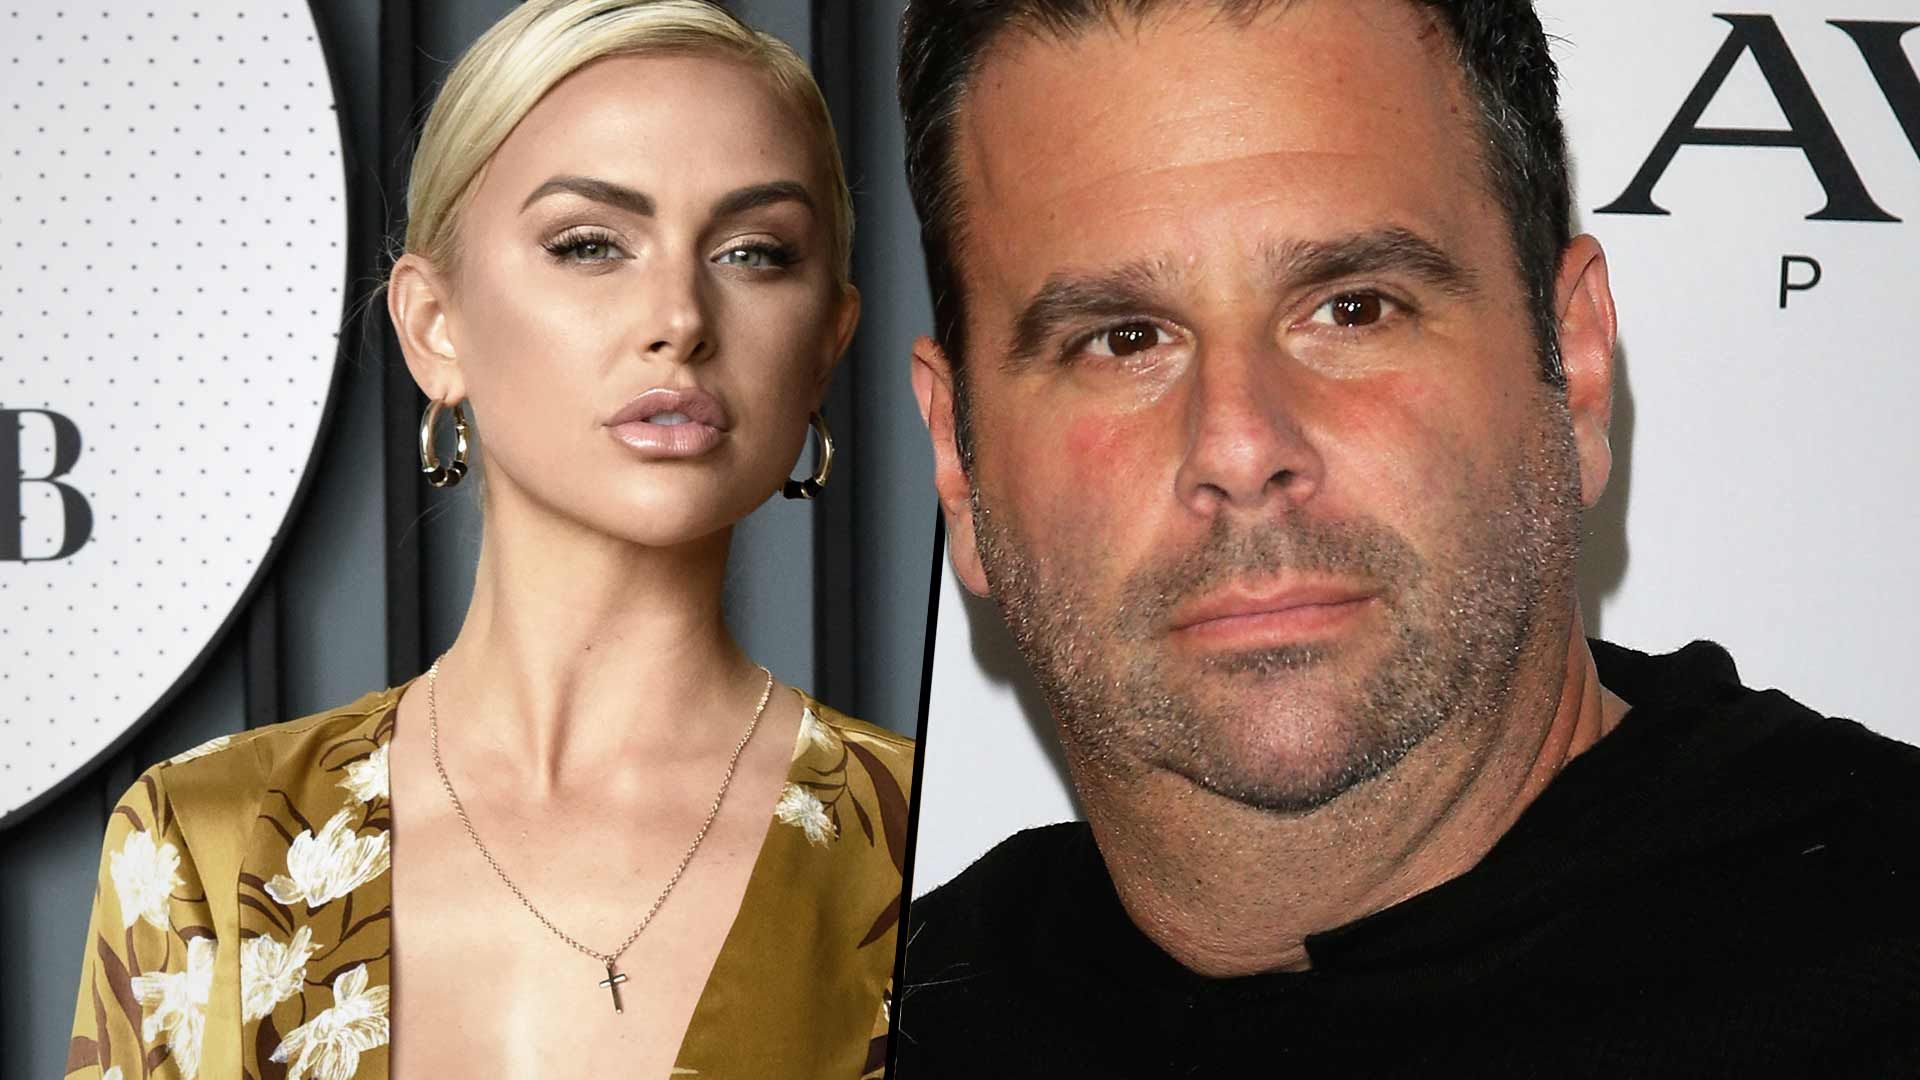 'Vanderpump Rules' Star Lala Kent Ends Feud With Husband Randall's Ex-Wife Ambyr Childers